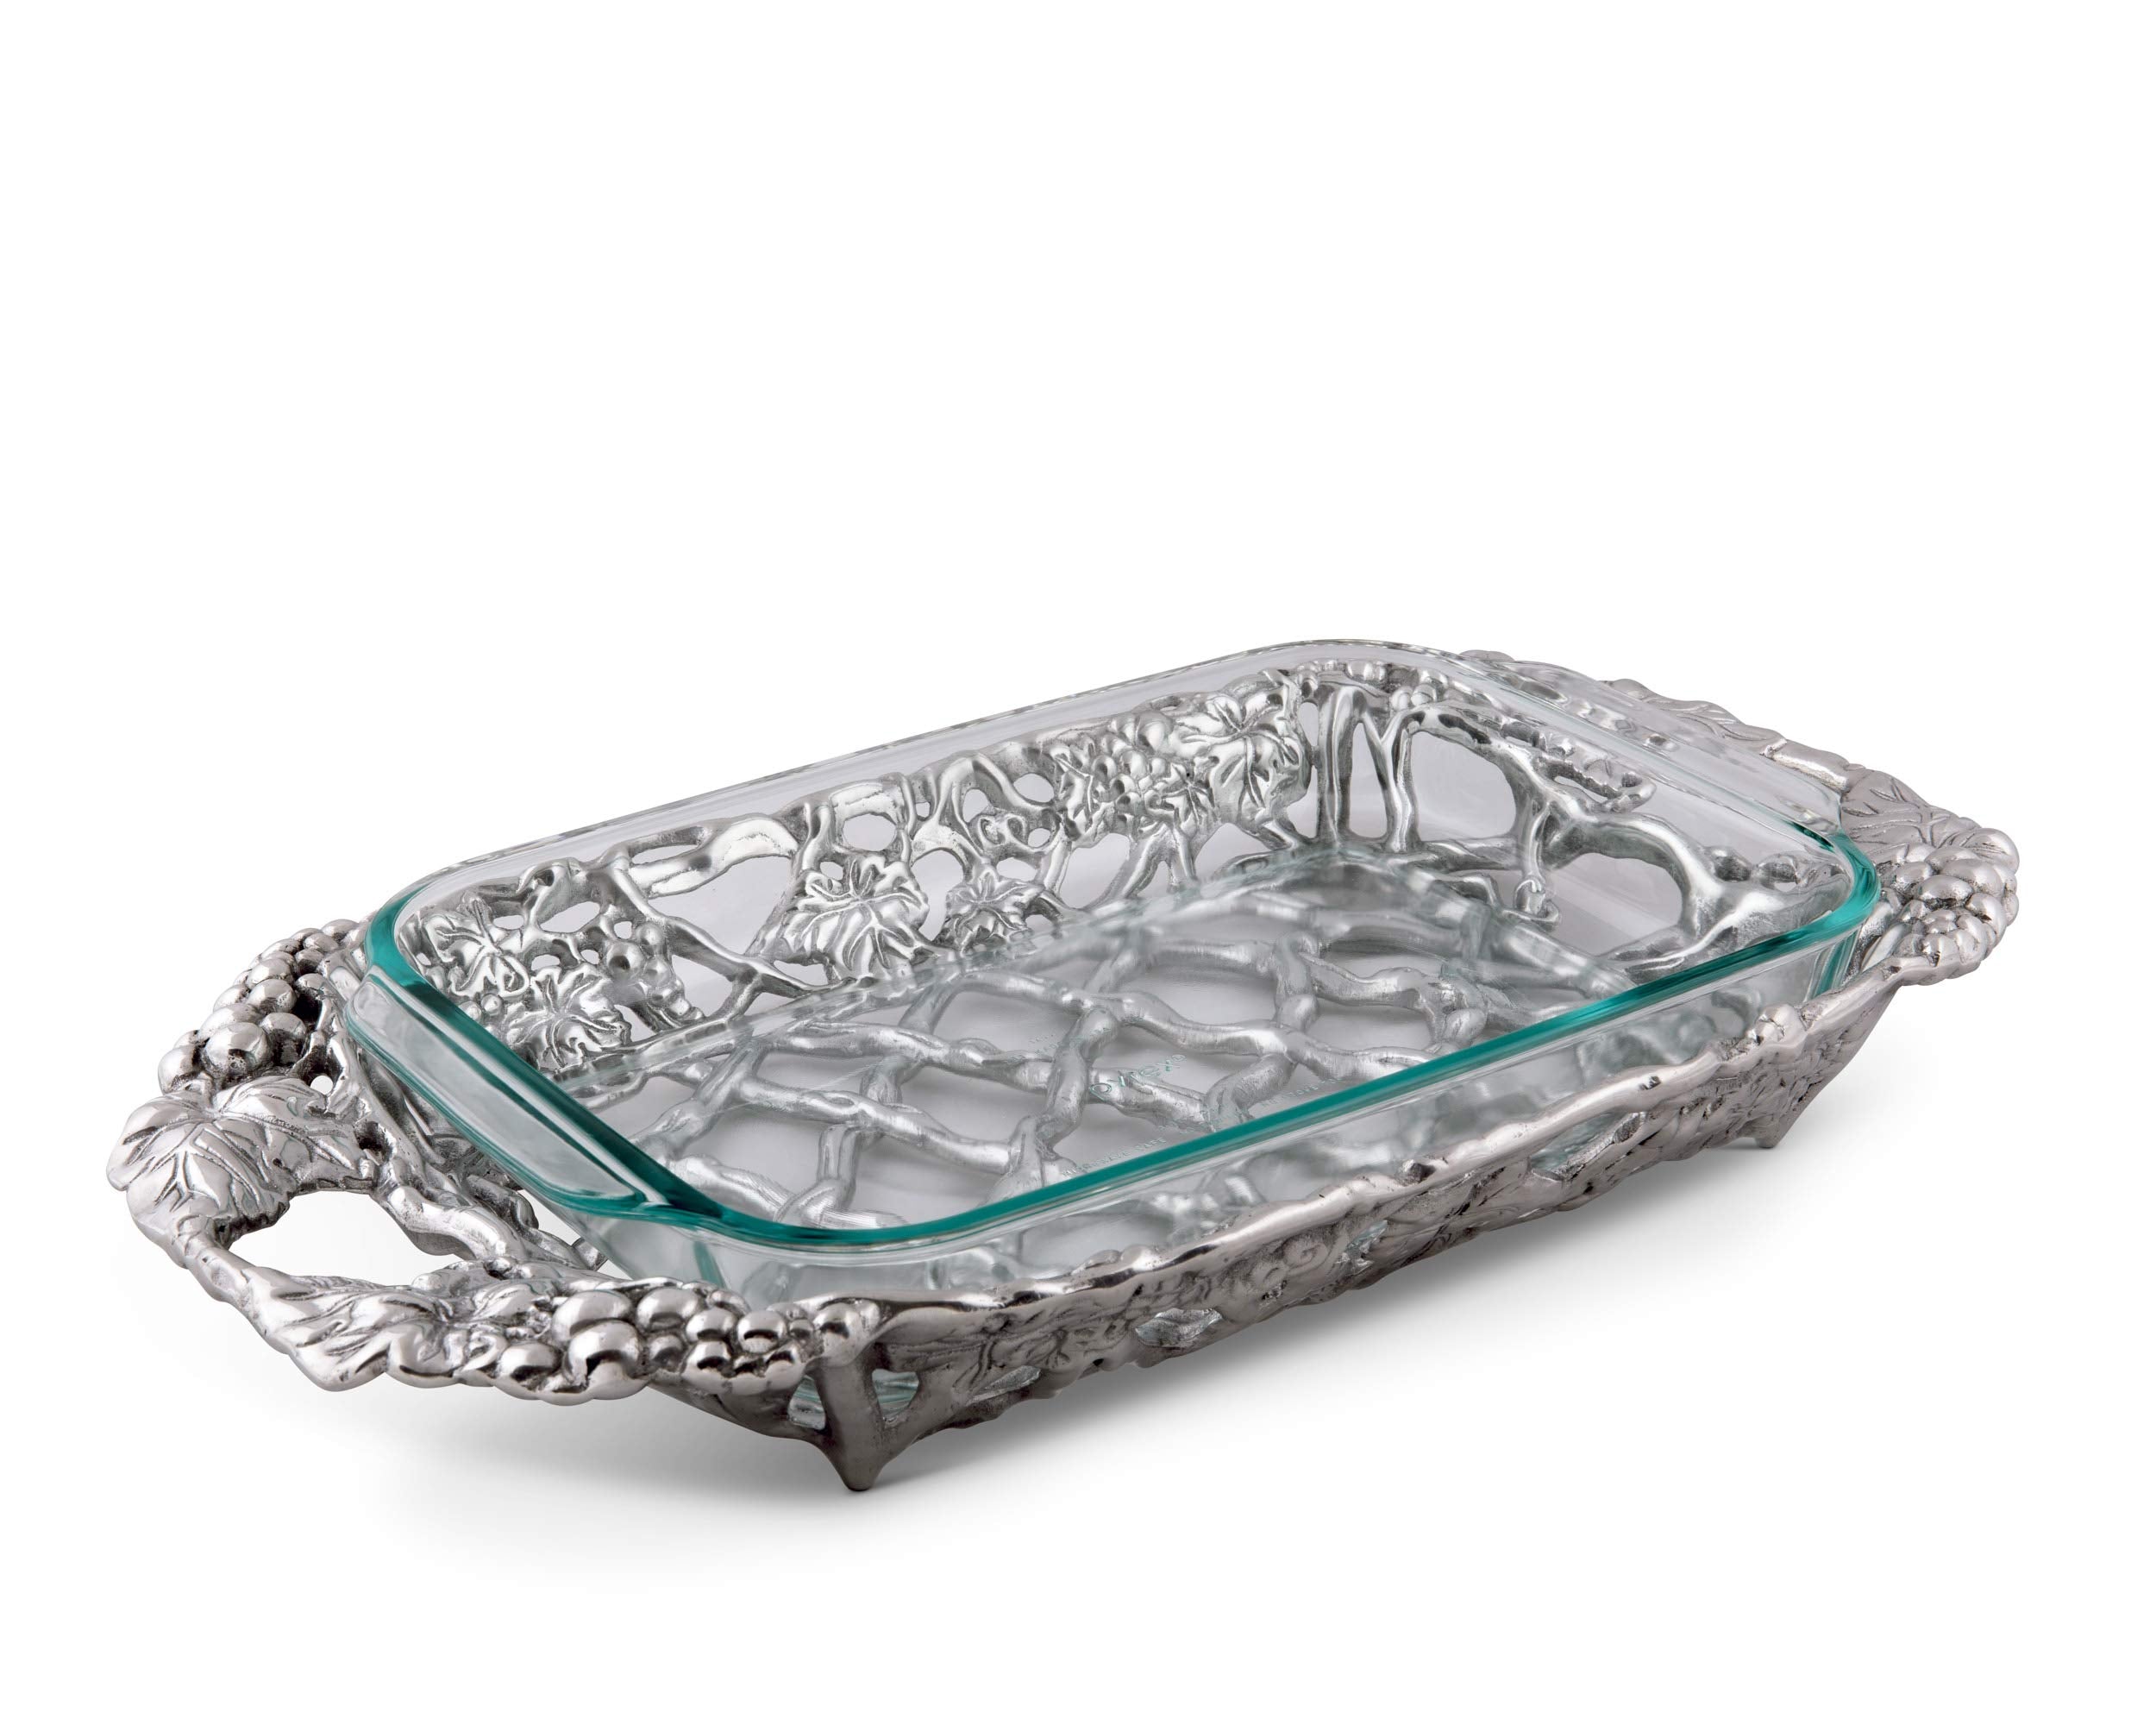 Arthur Court Metal Pyrex Glass Casserole Dish Holder Grape Pattern Sand Casted in Aluminum with Artisan Quality Hand Polished Design Tarnish-Free 21 inch Long 3 Quart Removable Glass Dish Included